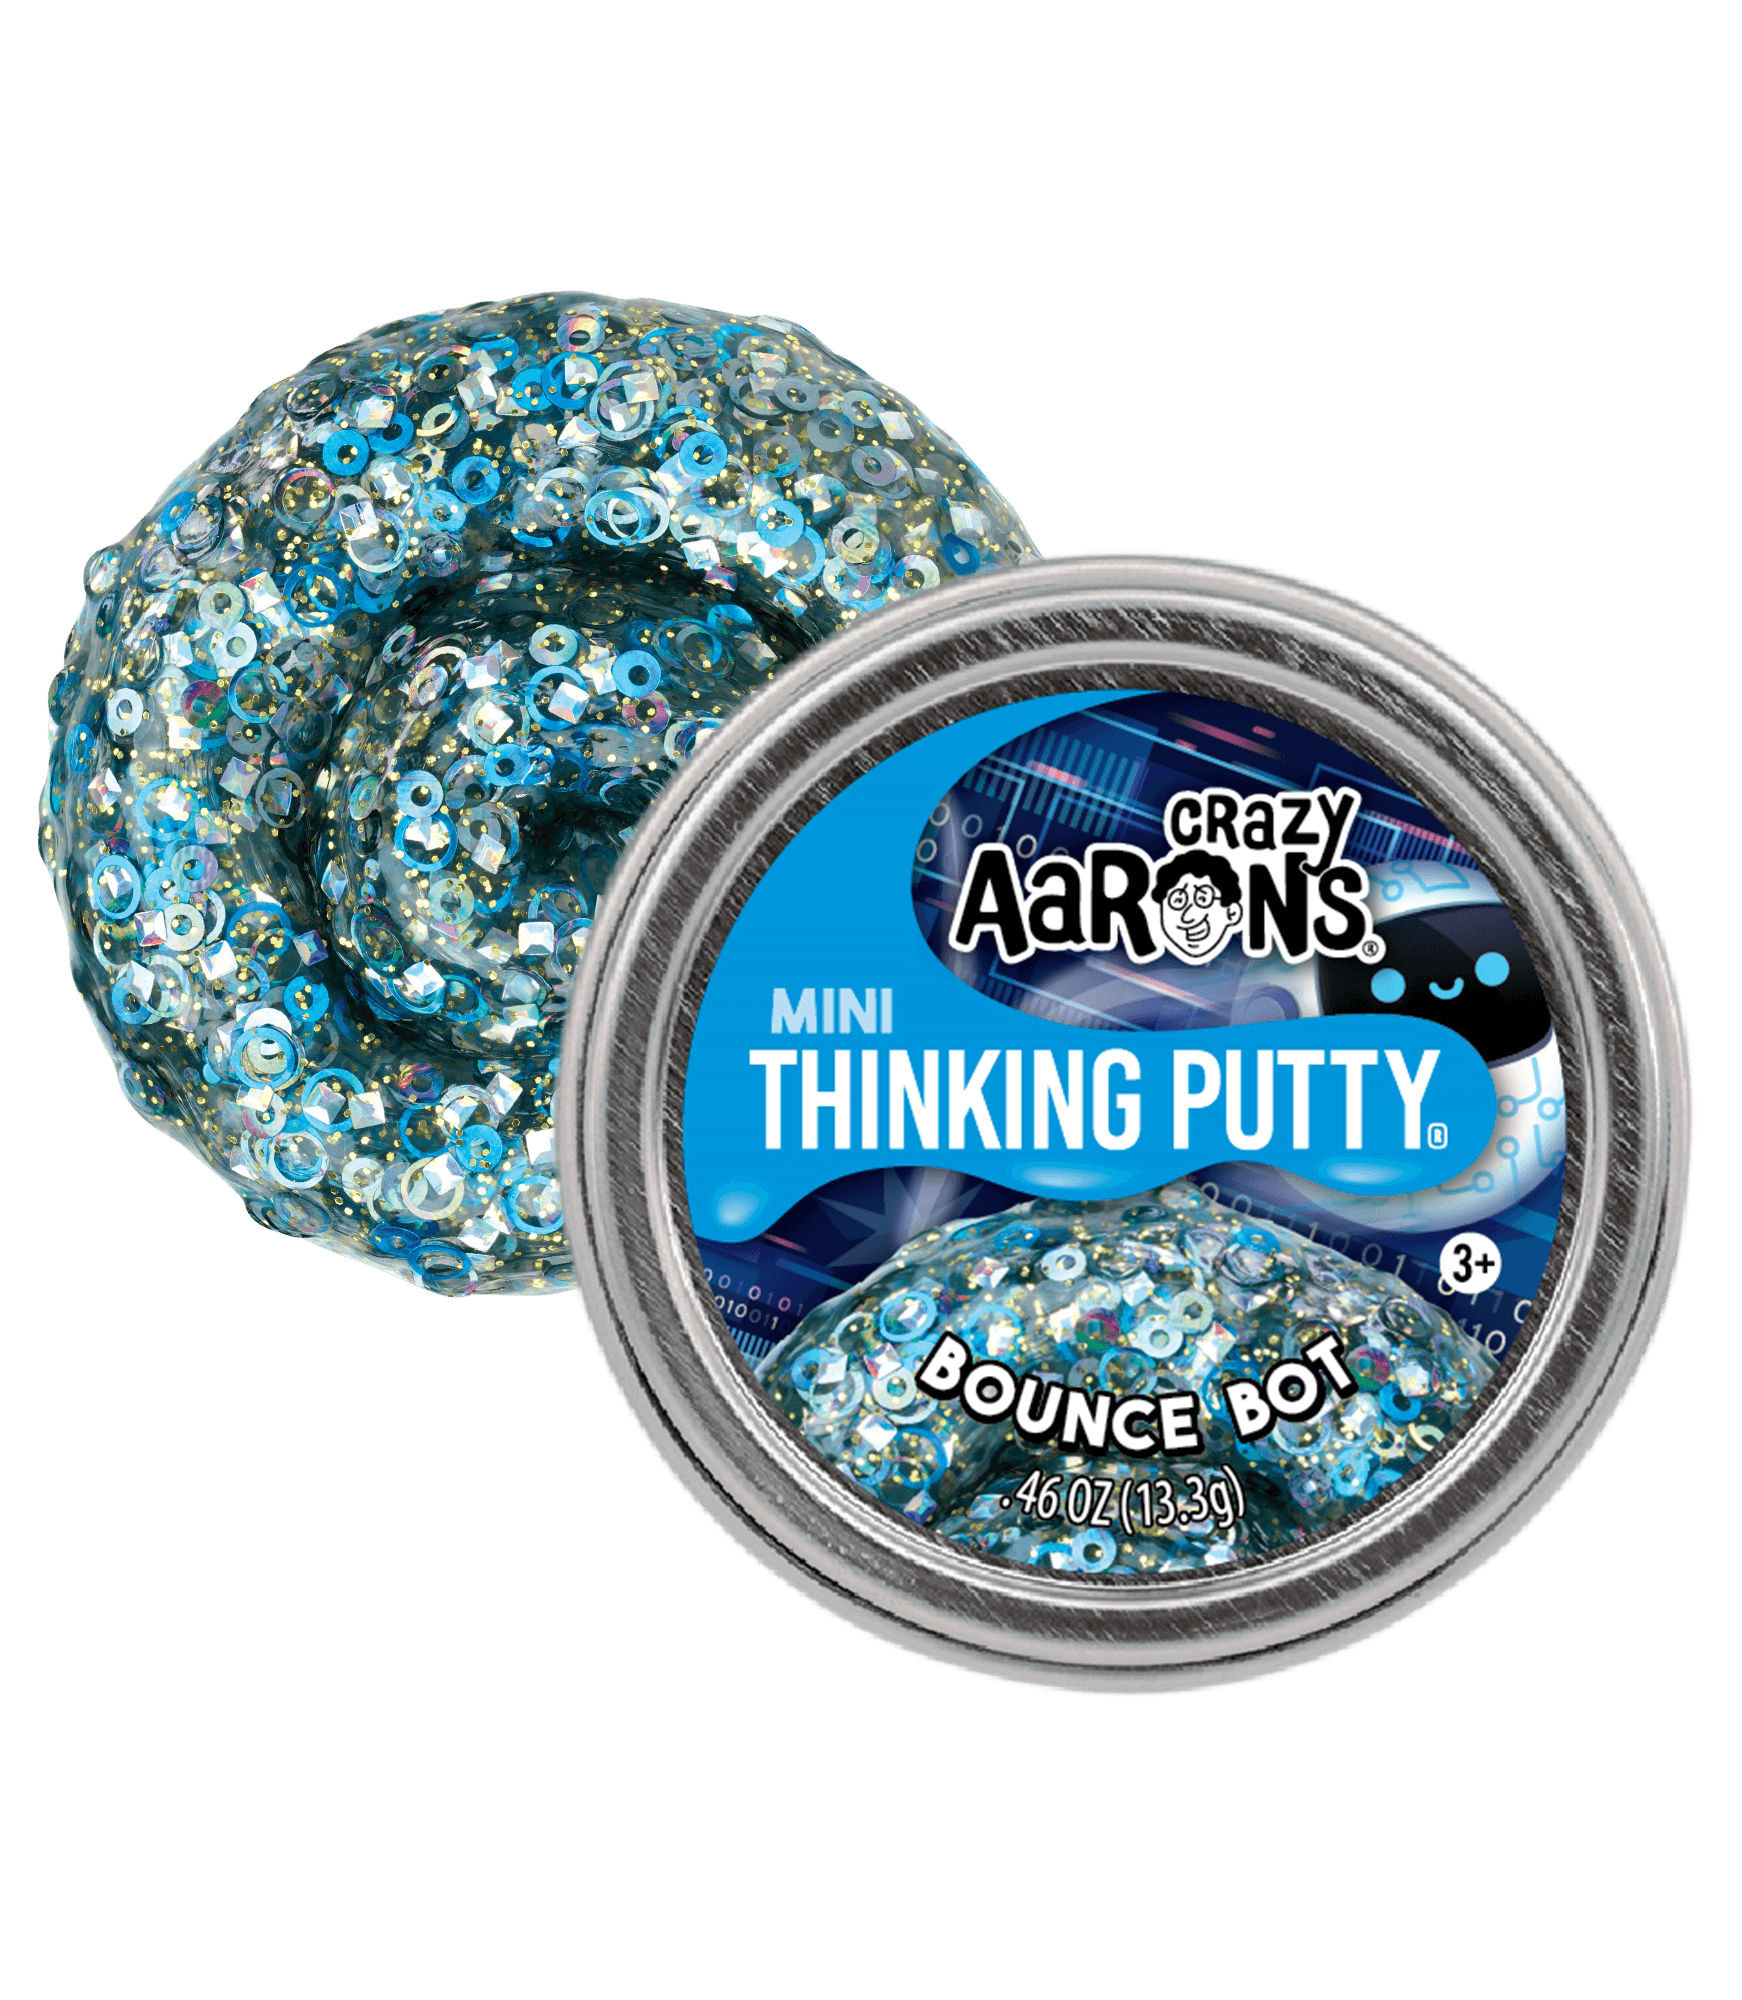 Liquid Glass Crystal Clear Thinking Putty – Treehouse Toys